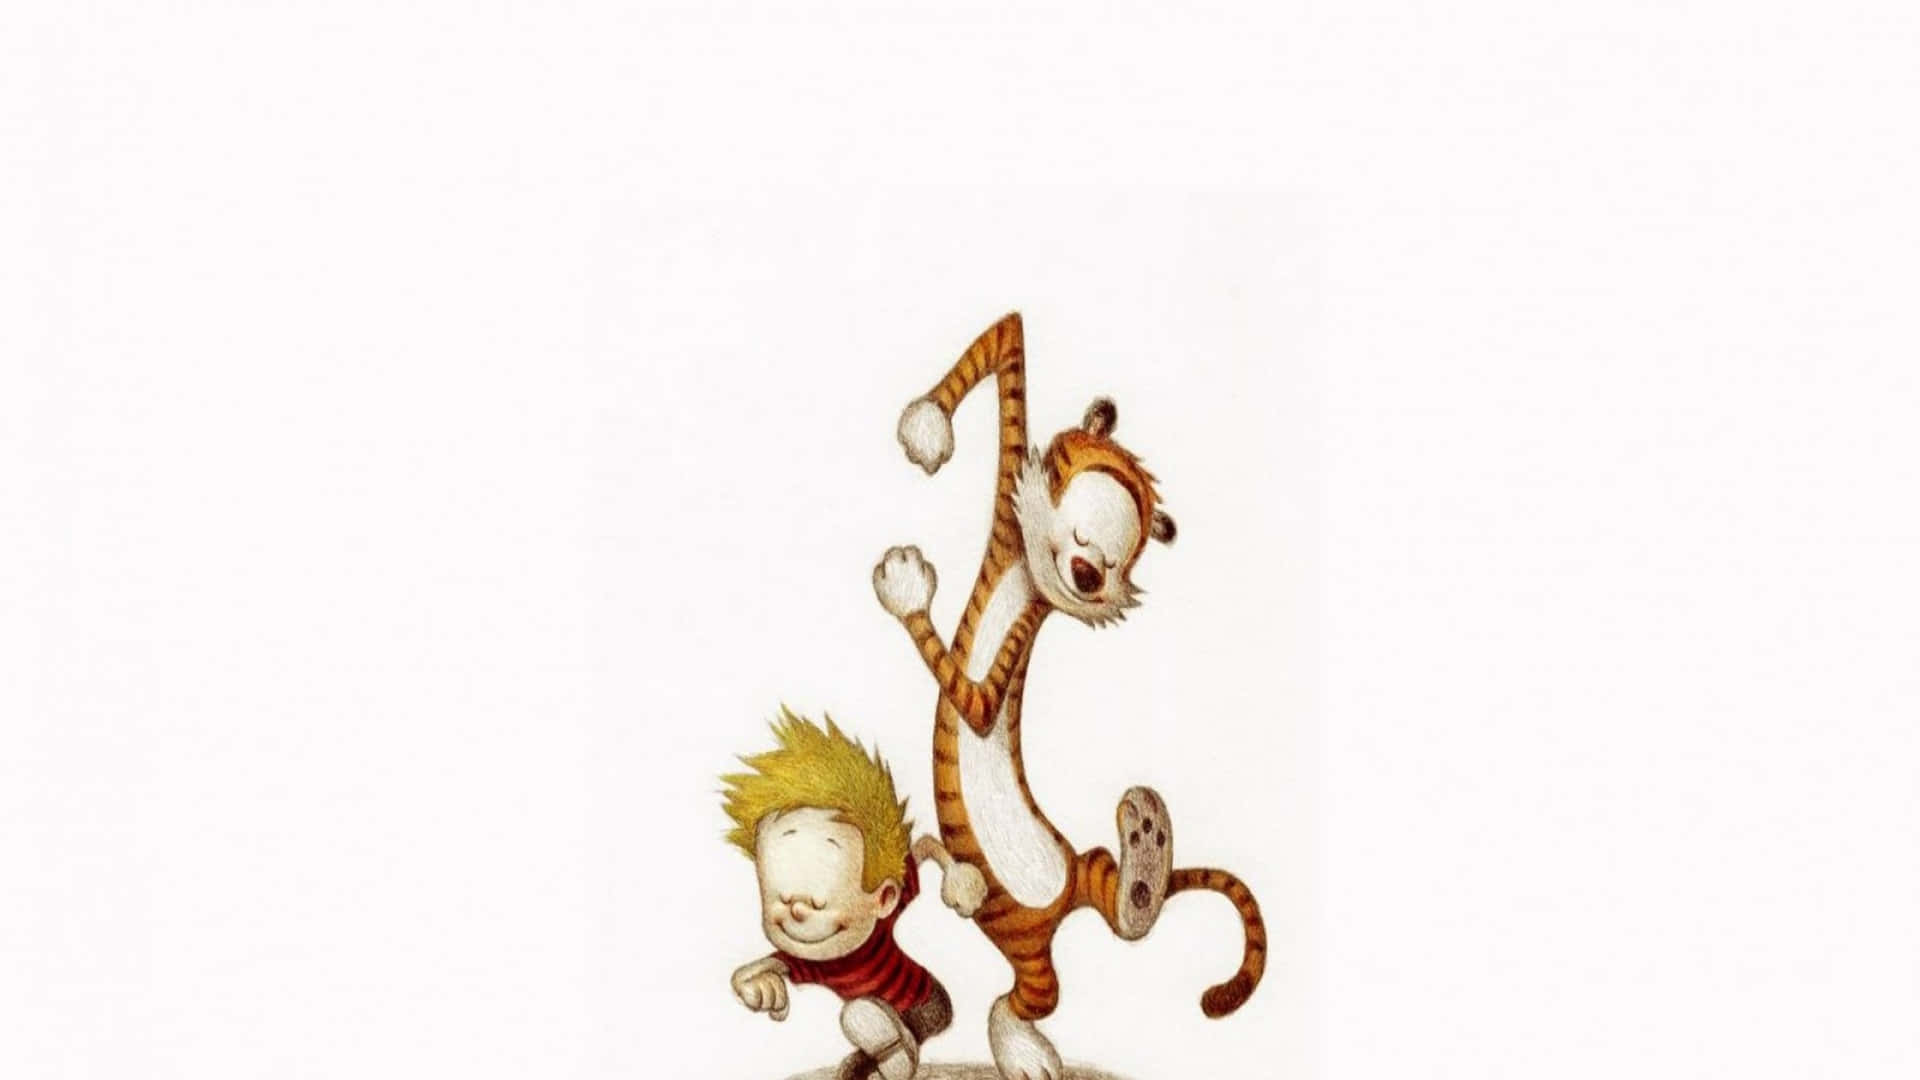 The classic duo of Calvin and Hobbes, ready for their next adventure Wallpaper